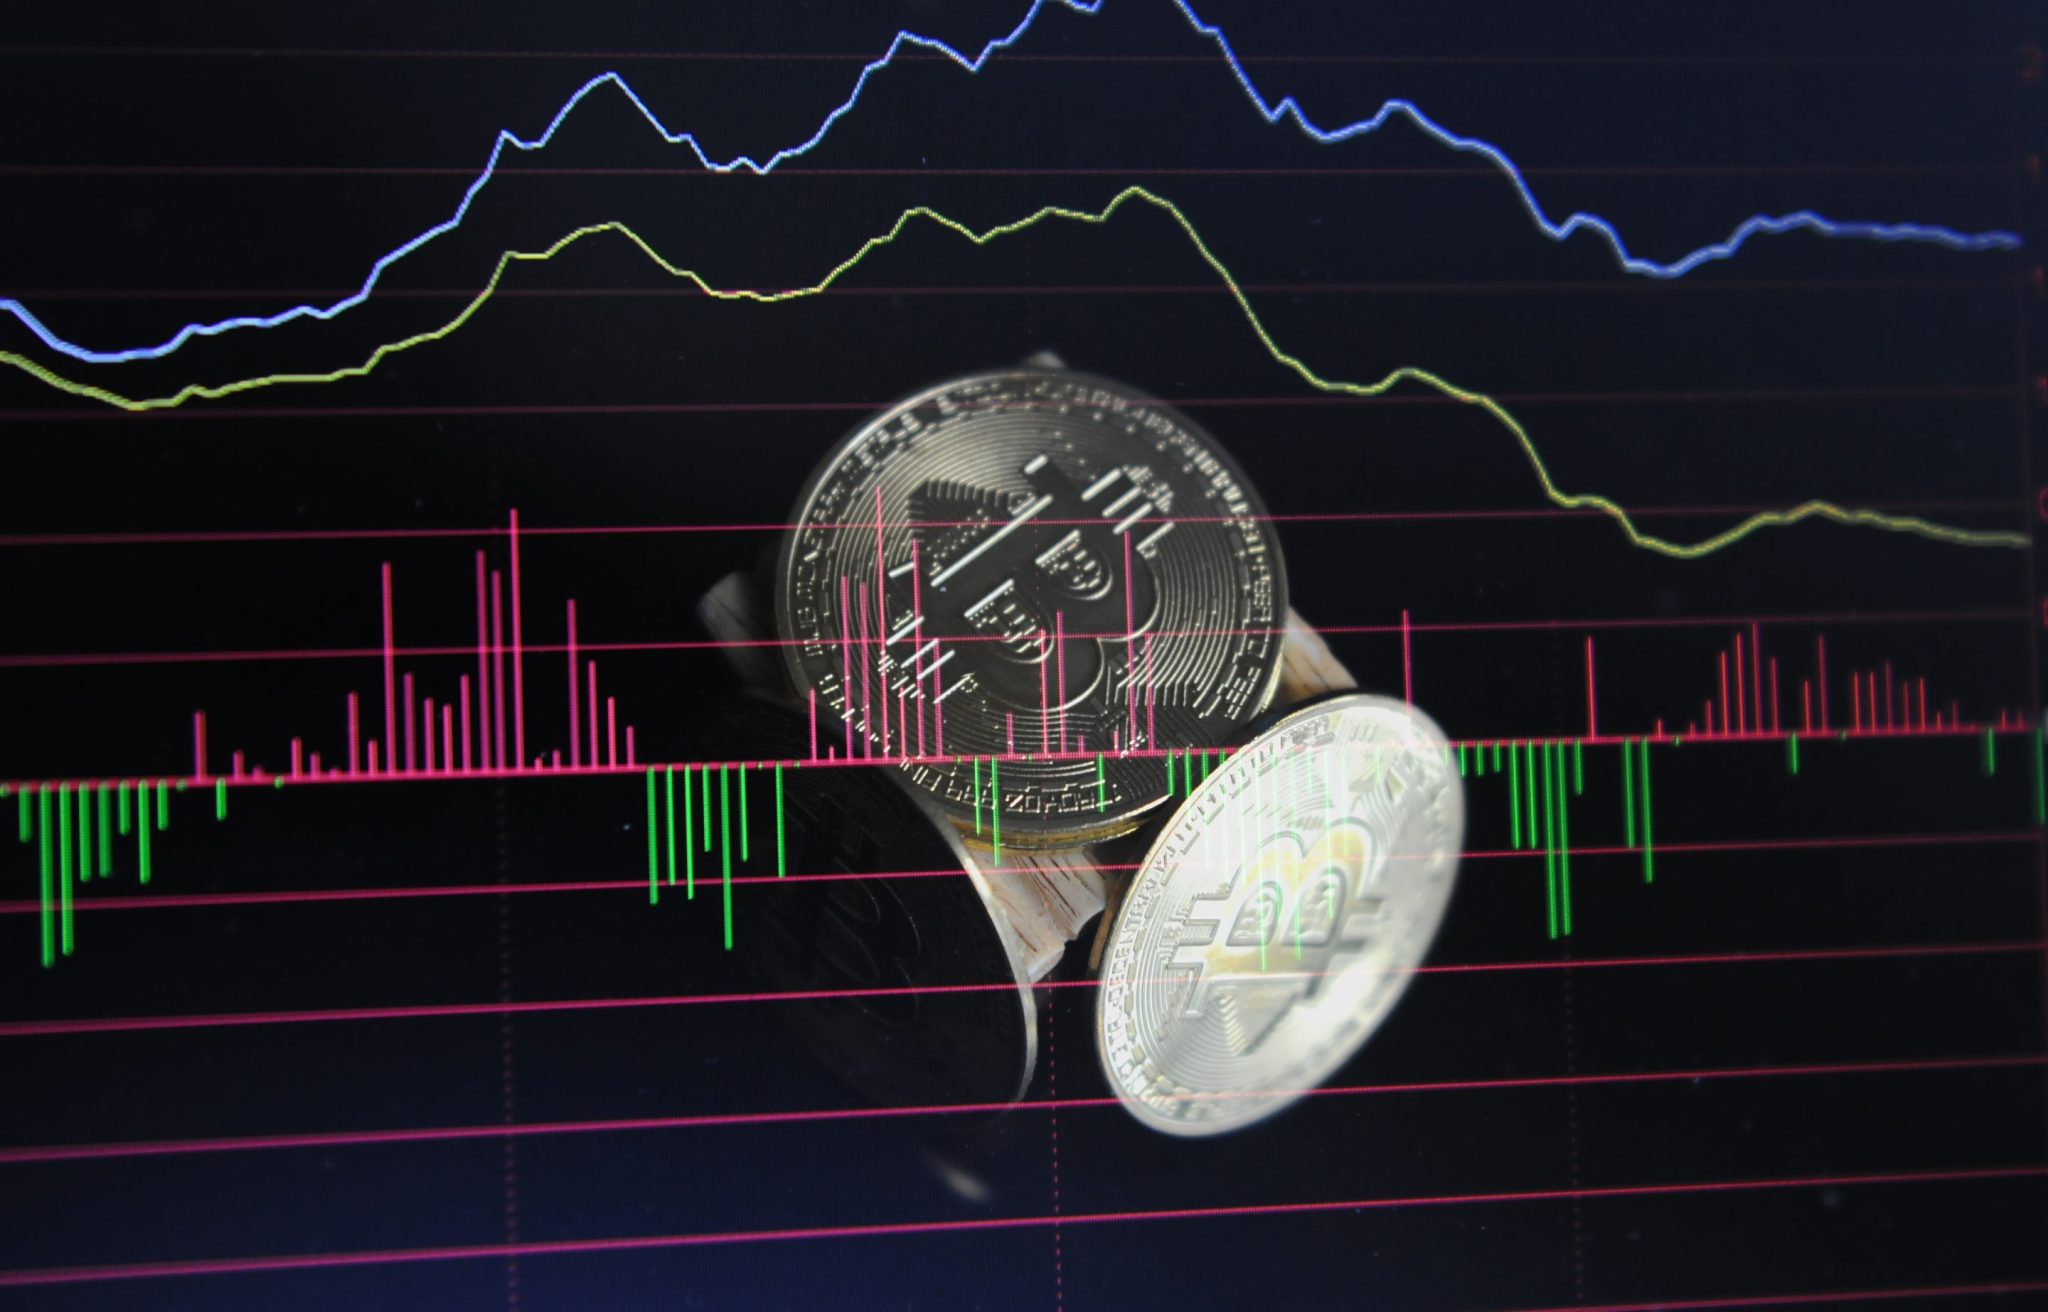 Is Bitcoin due for a major correction? JPMorgan predicts drop to $42,000 after April halving